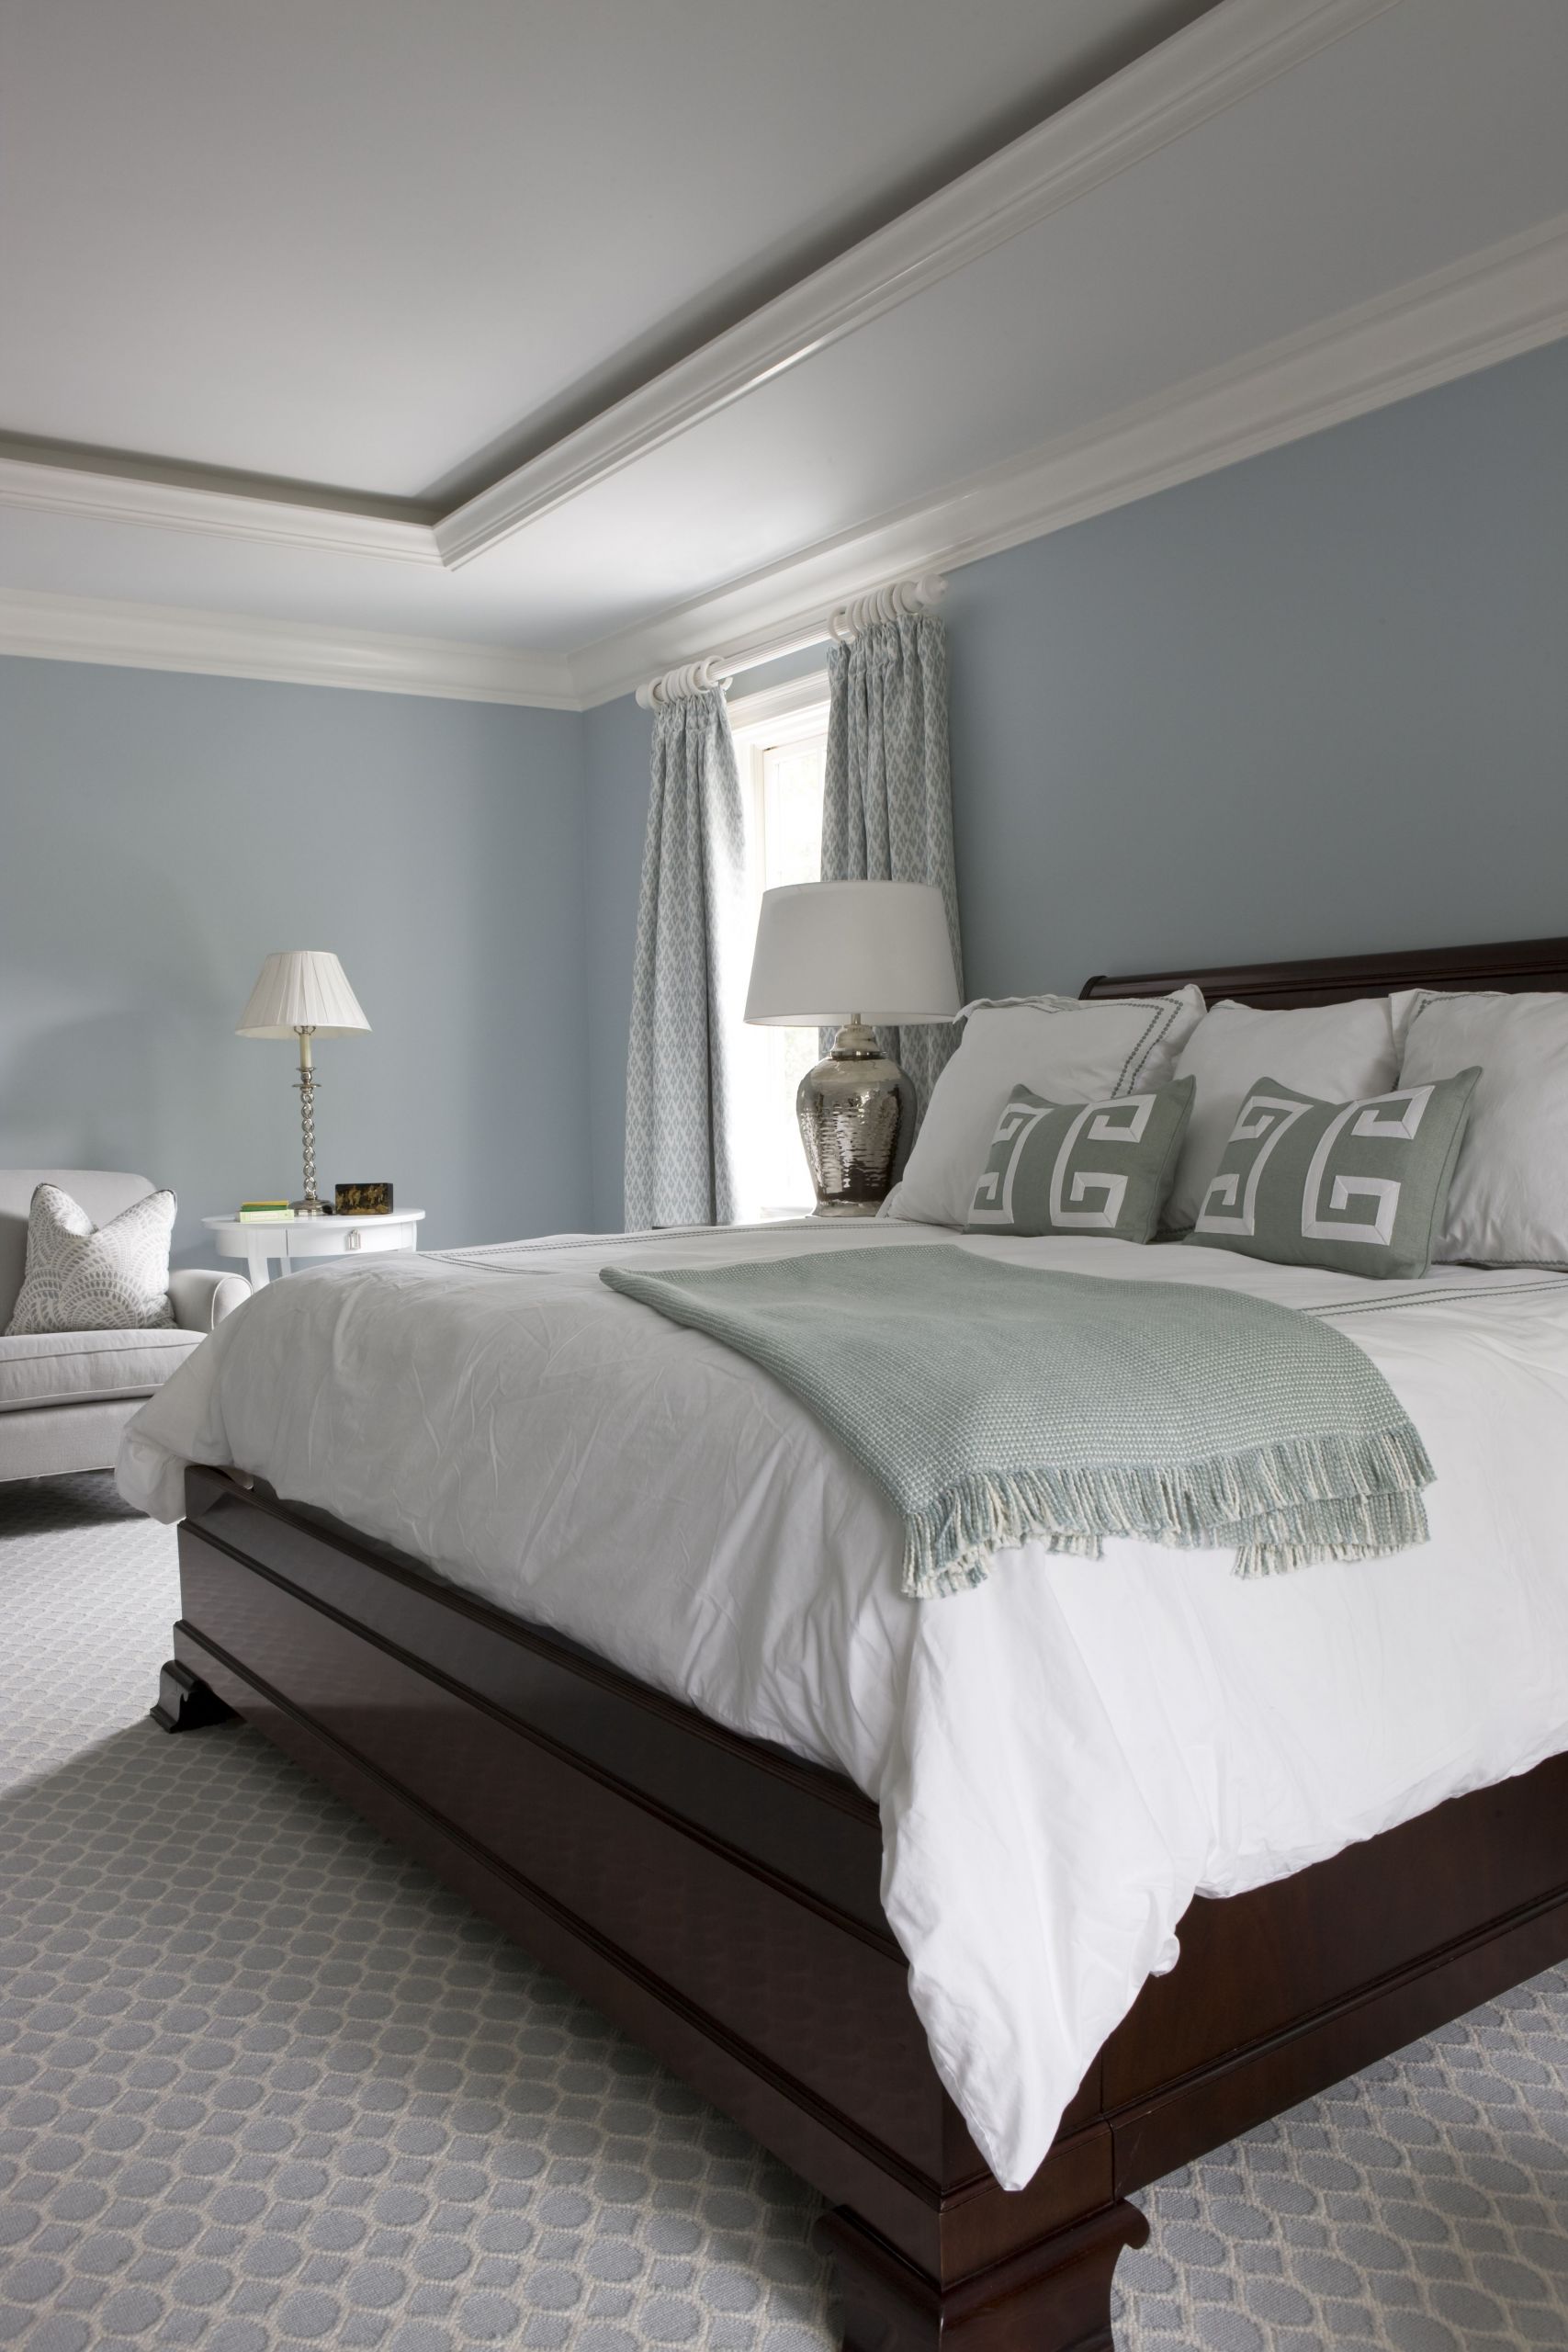 Master Bedroom Wall Colors
 Luxe Magazine Summer 2014 Sally Steponkus Interiors Master